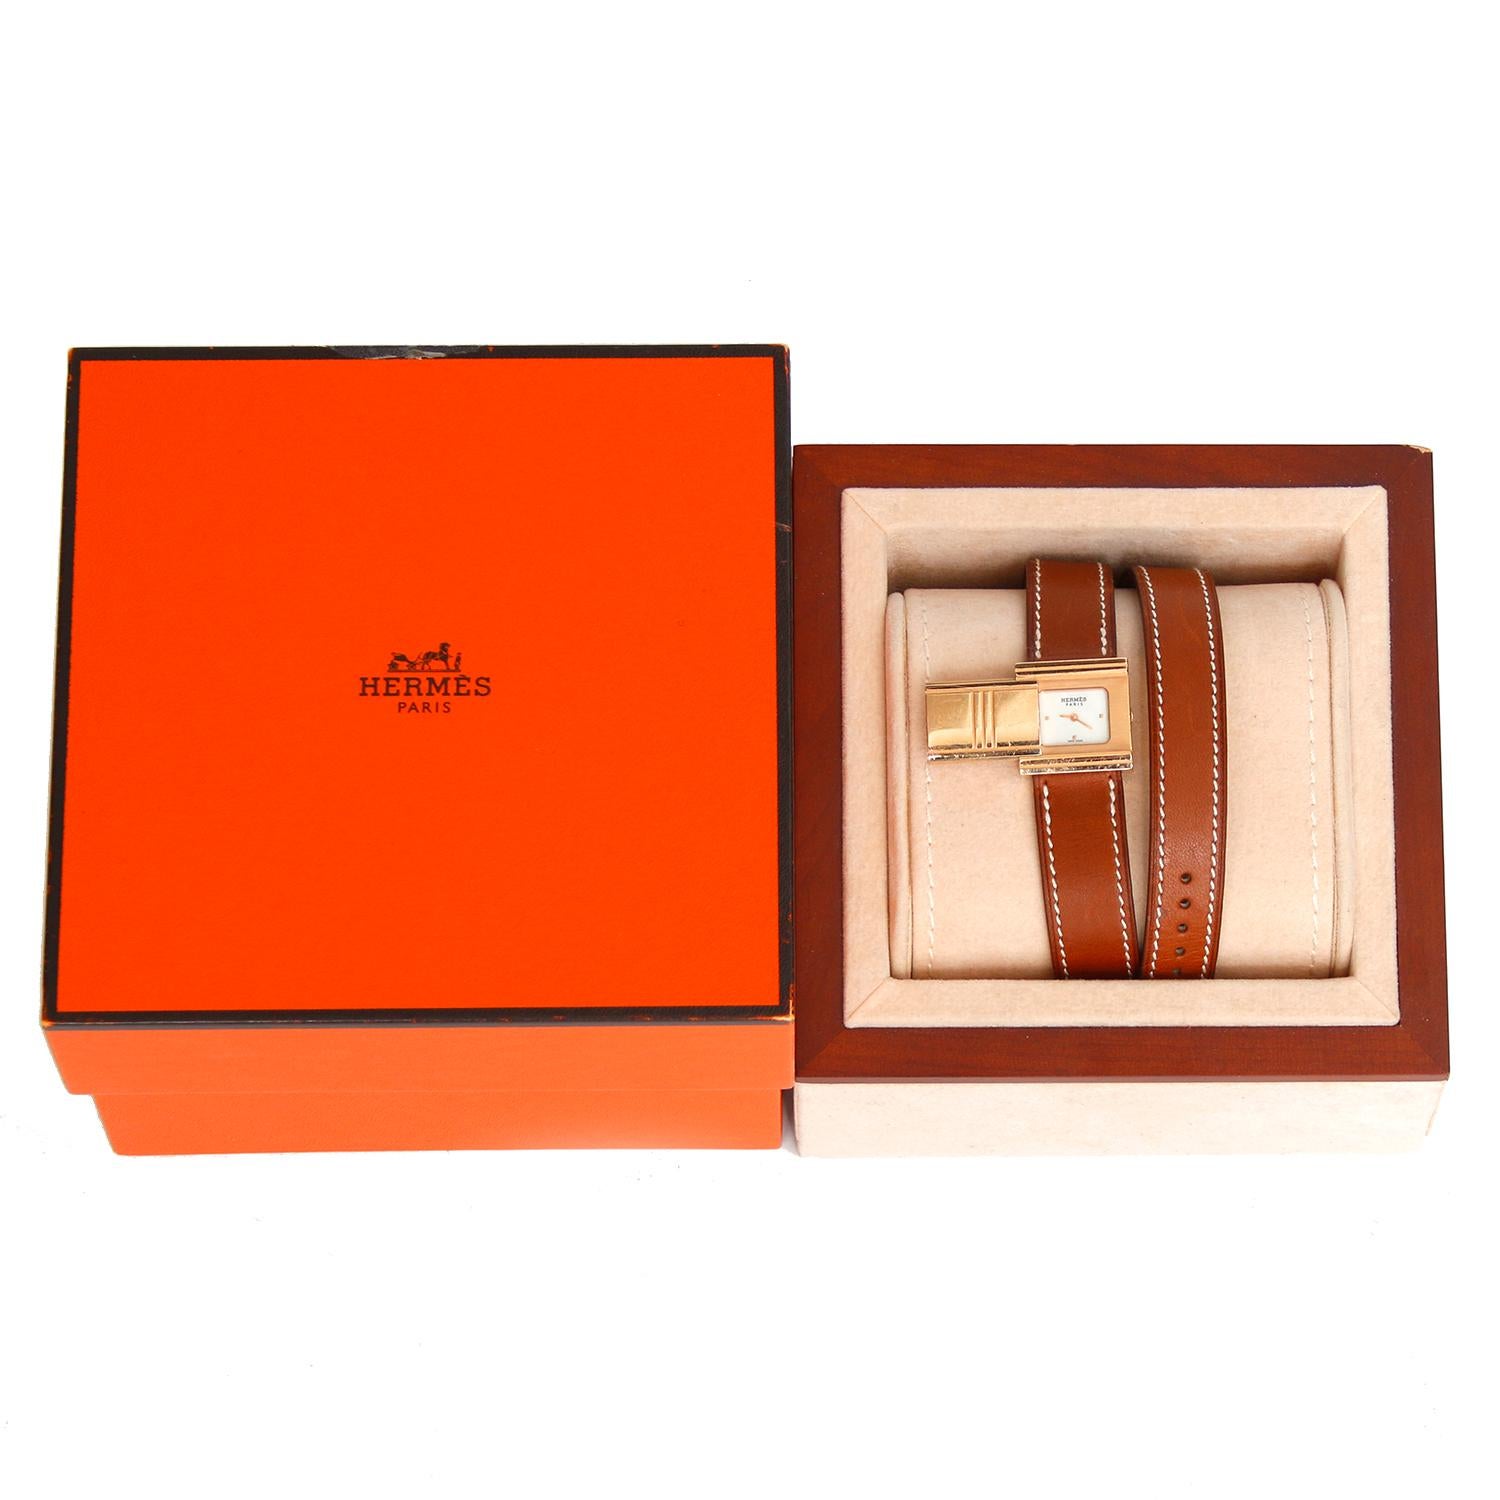 Hermes Glissade 18K Rose Gold Ladies Watch  - Quartz. 18K Rose Gold case ( 20 mm ) . Mother of Pearl . Brown leather strap with tang buckle . Pre-owned with Hermes box .